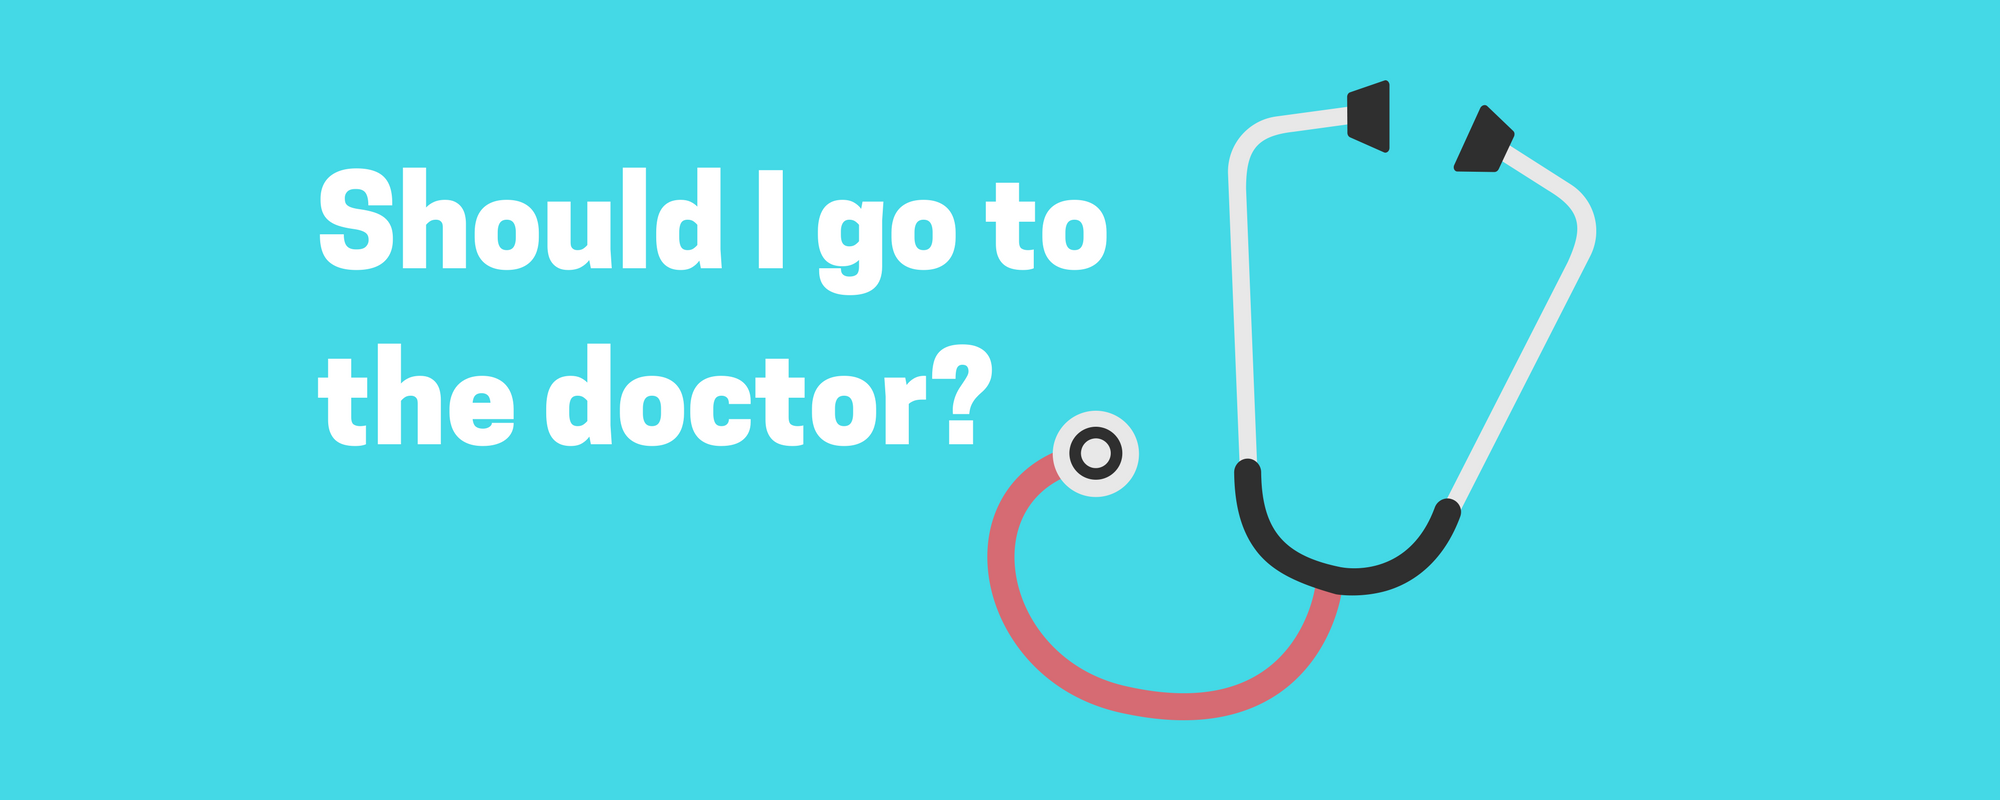 Should I go to the doctor about anxiety? - Blog